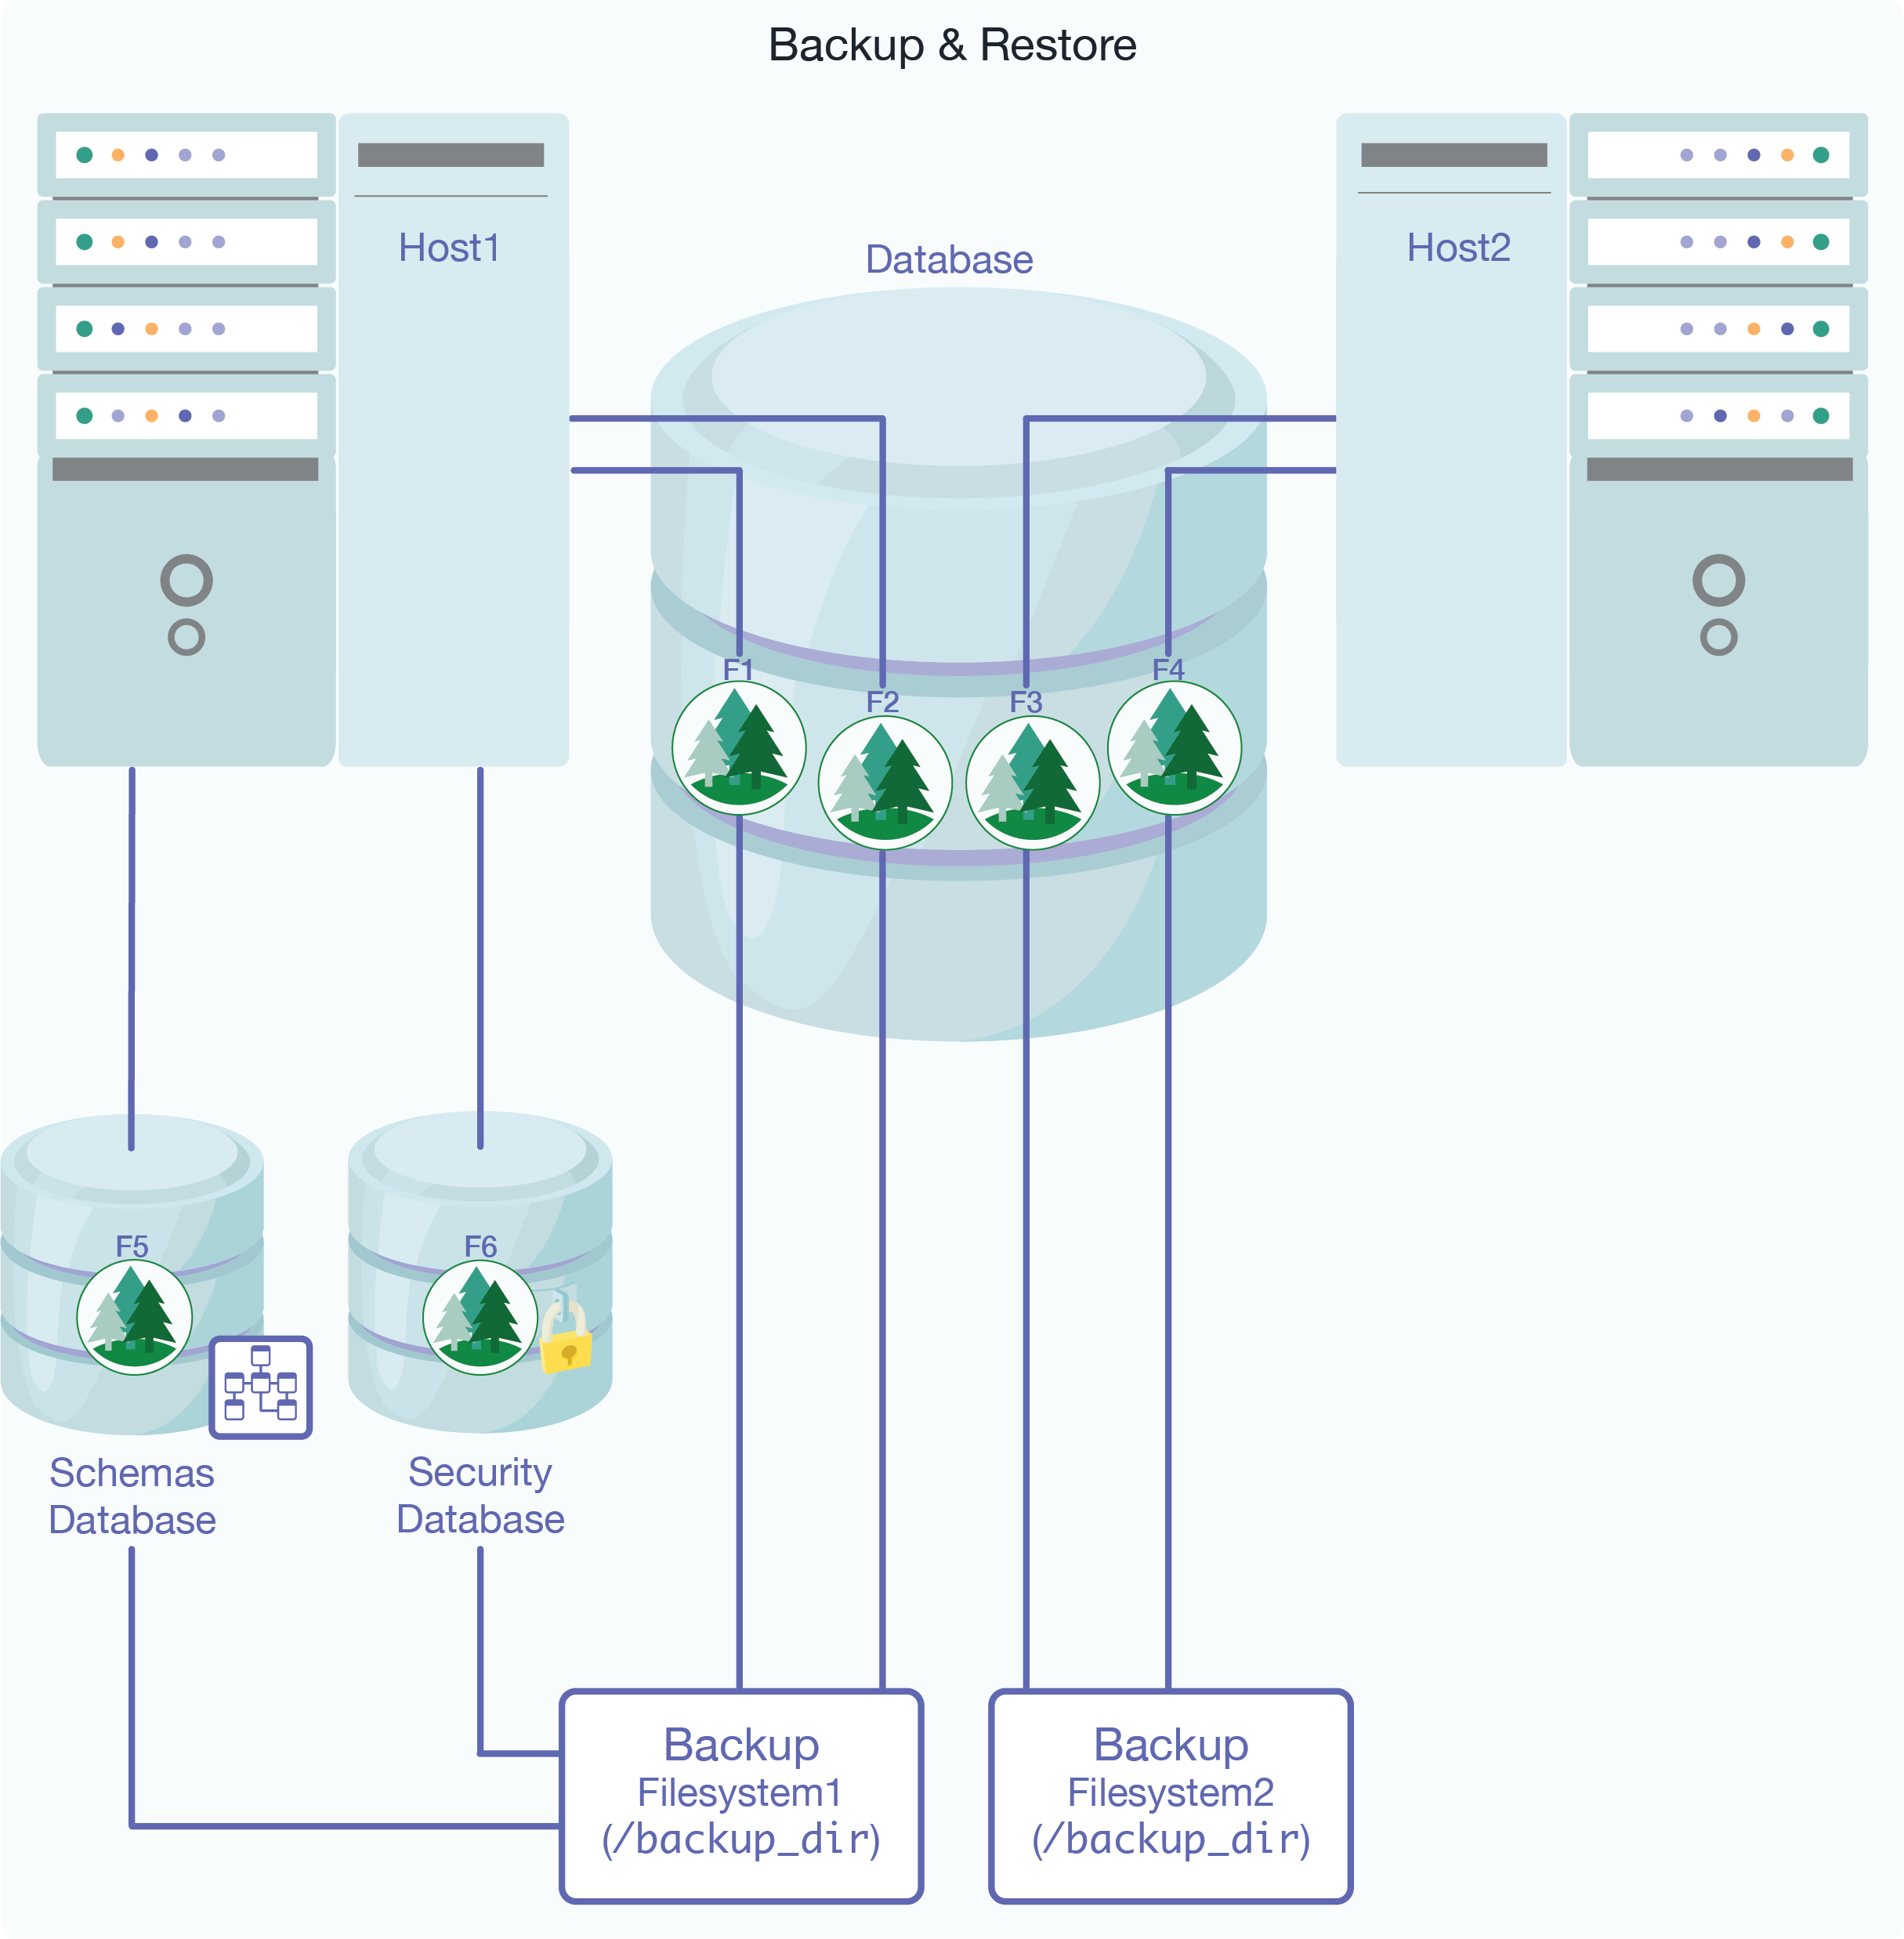 Figure showing a configuration where the Schemas and Security databases have forests F5 and F6 respectively, and they are also attached to Host1.